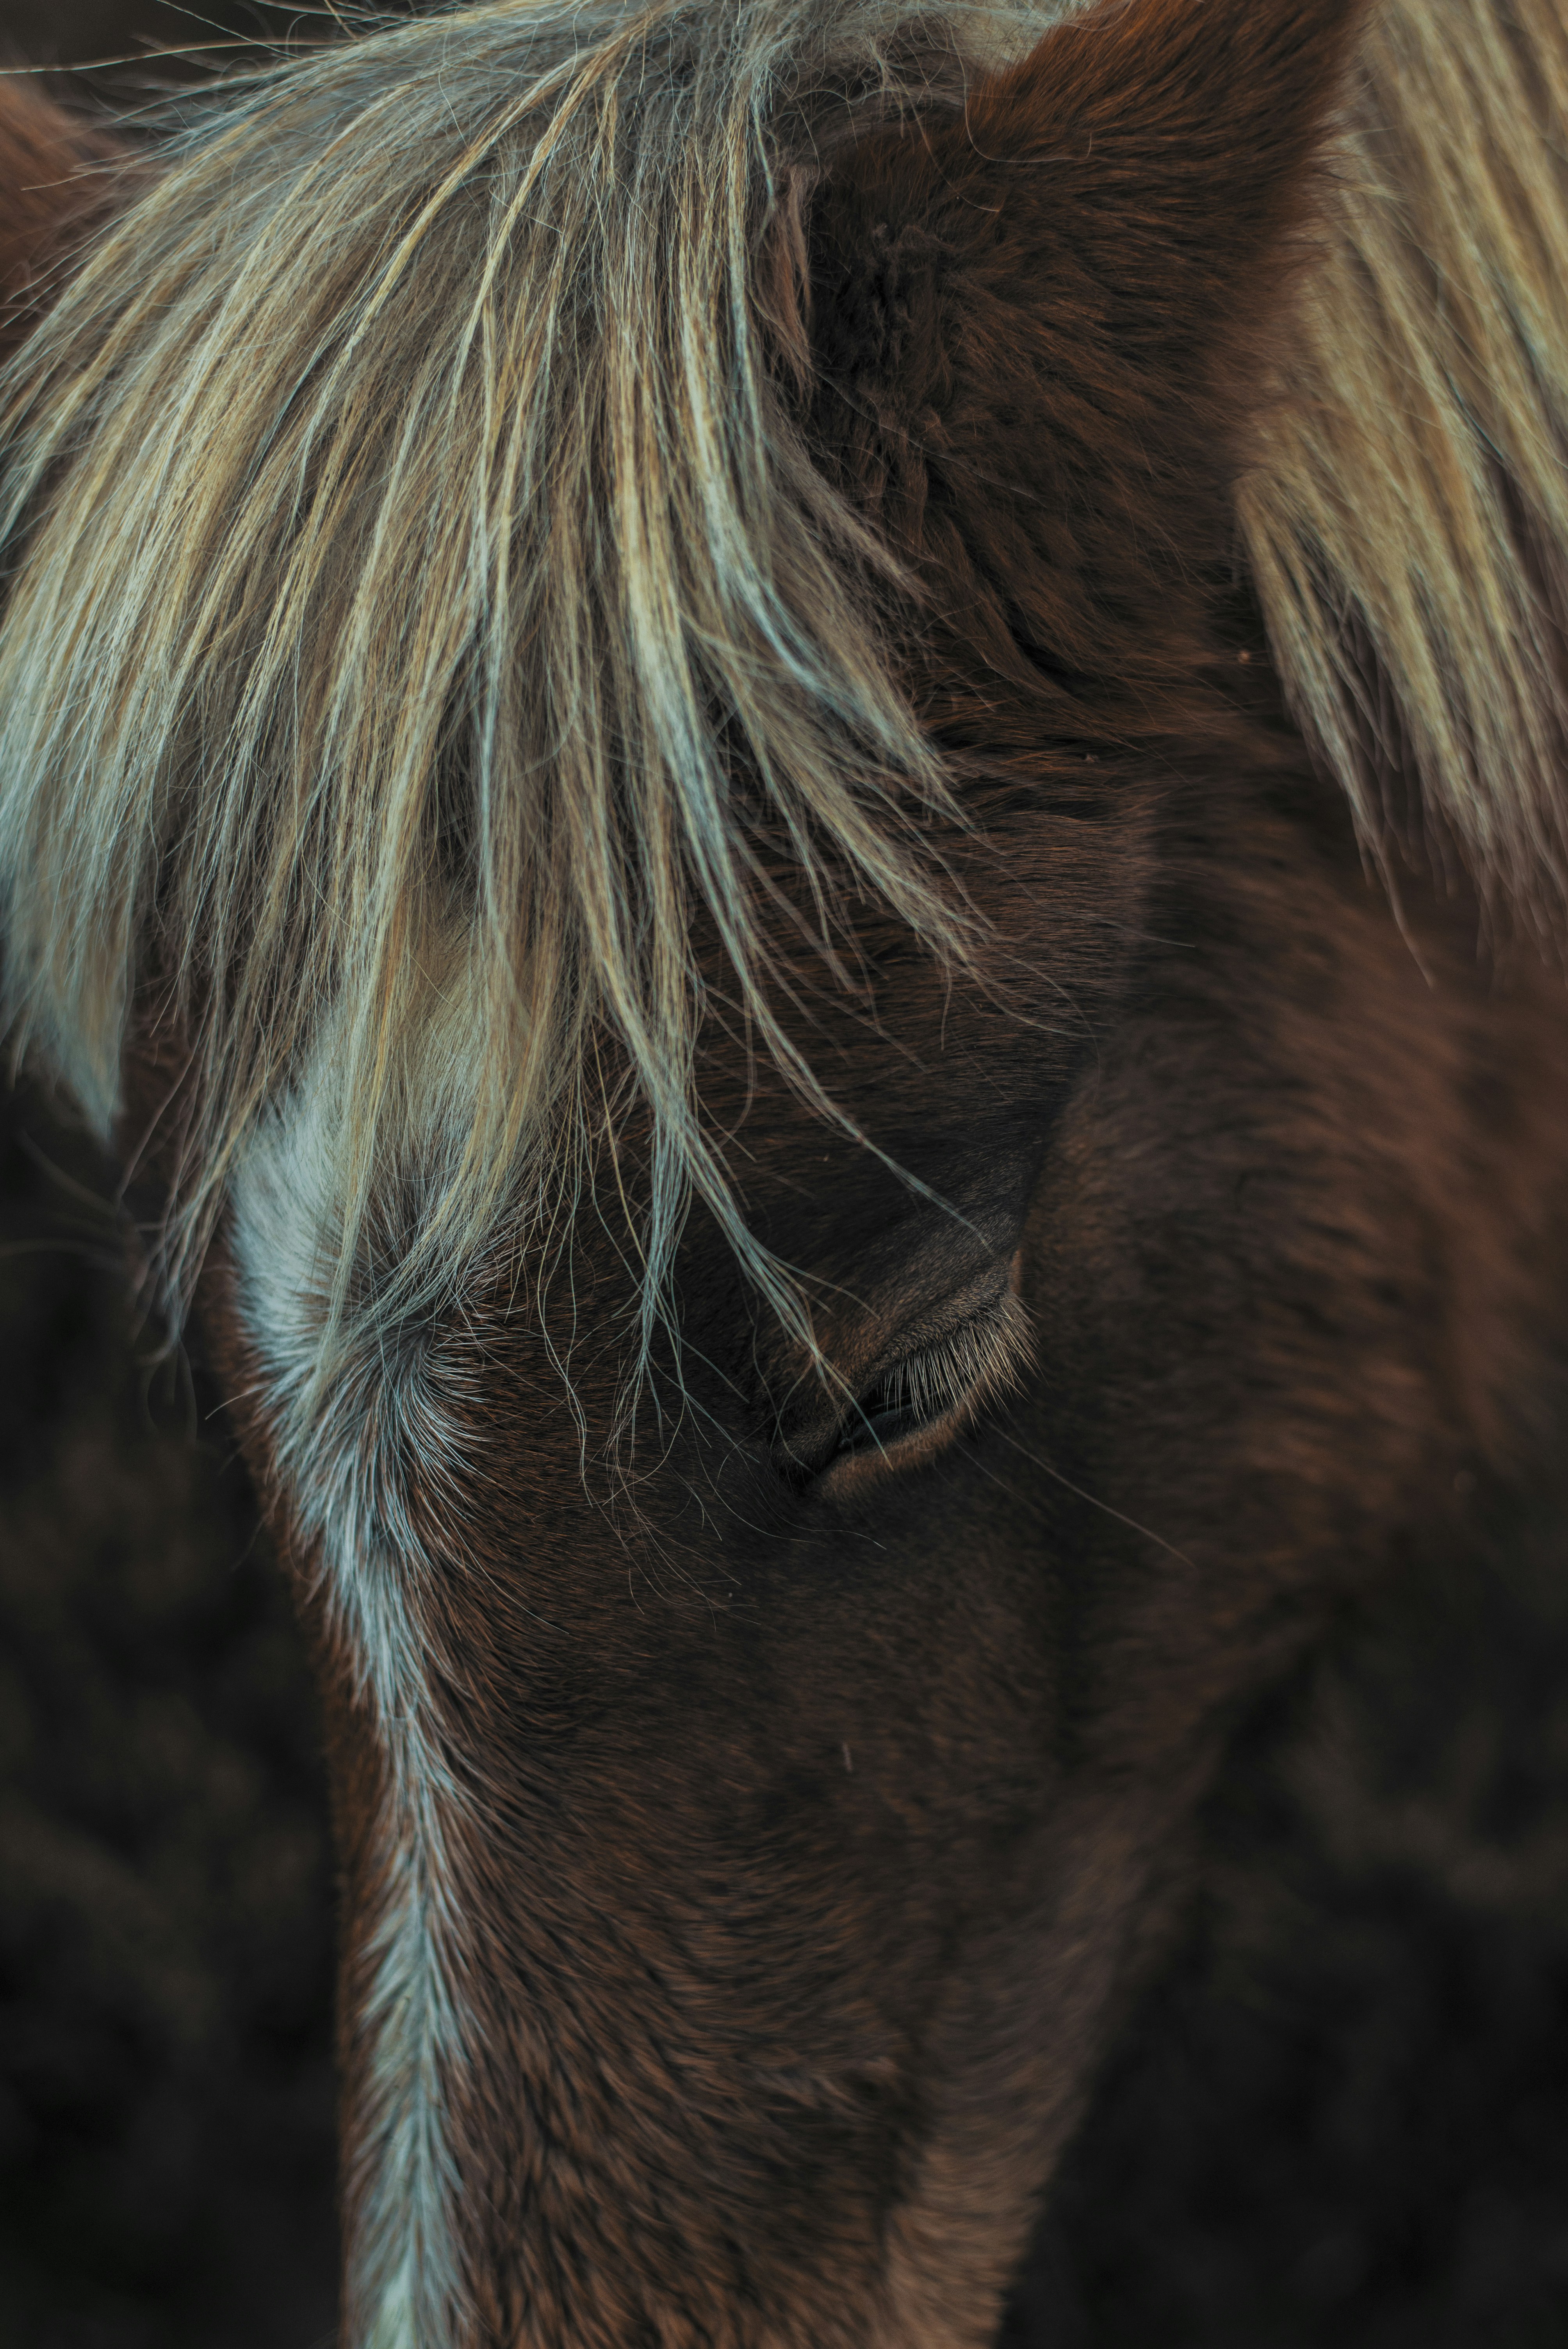 One of the wild wandering horses on the Veluwe in The Netherlands.